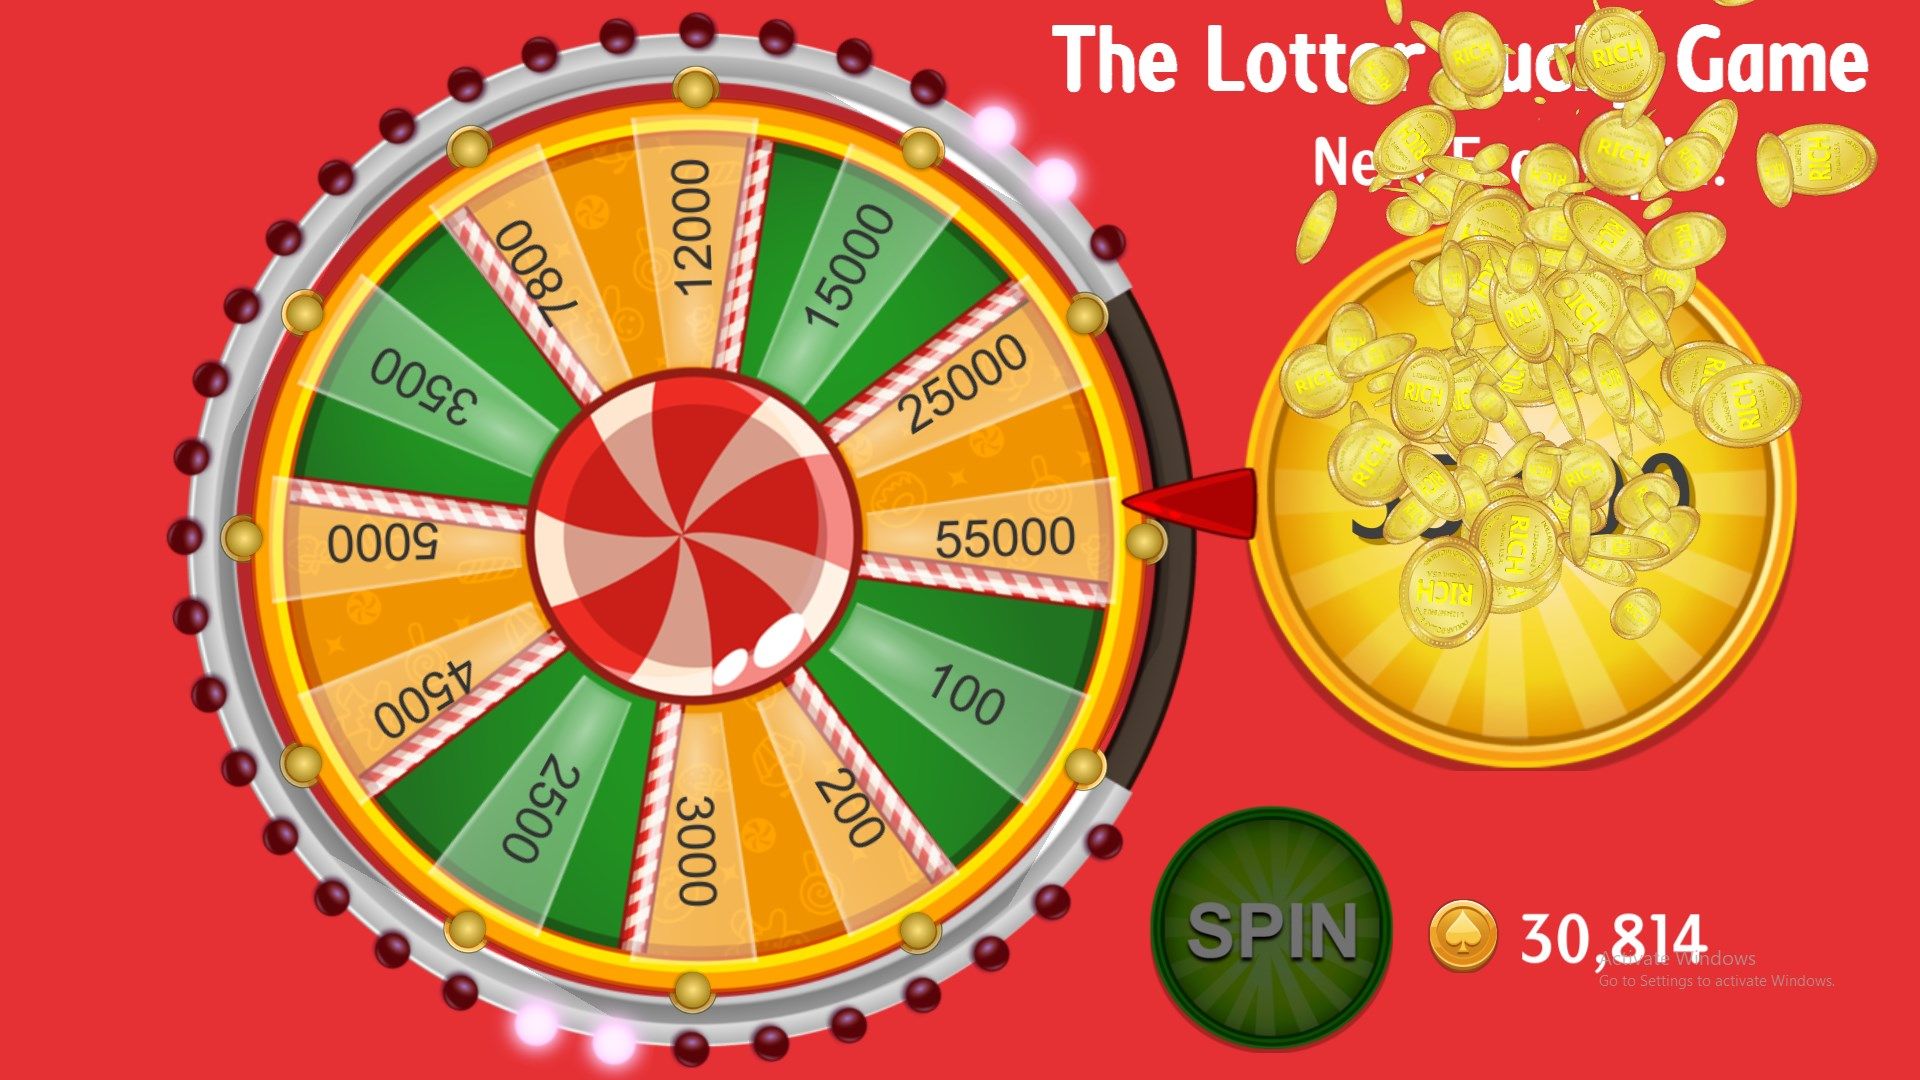 The Lotter Lucky Game